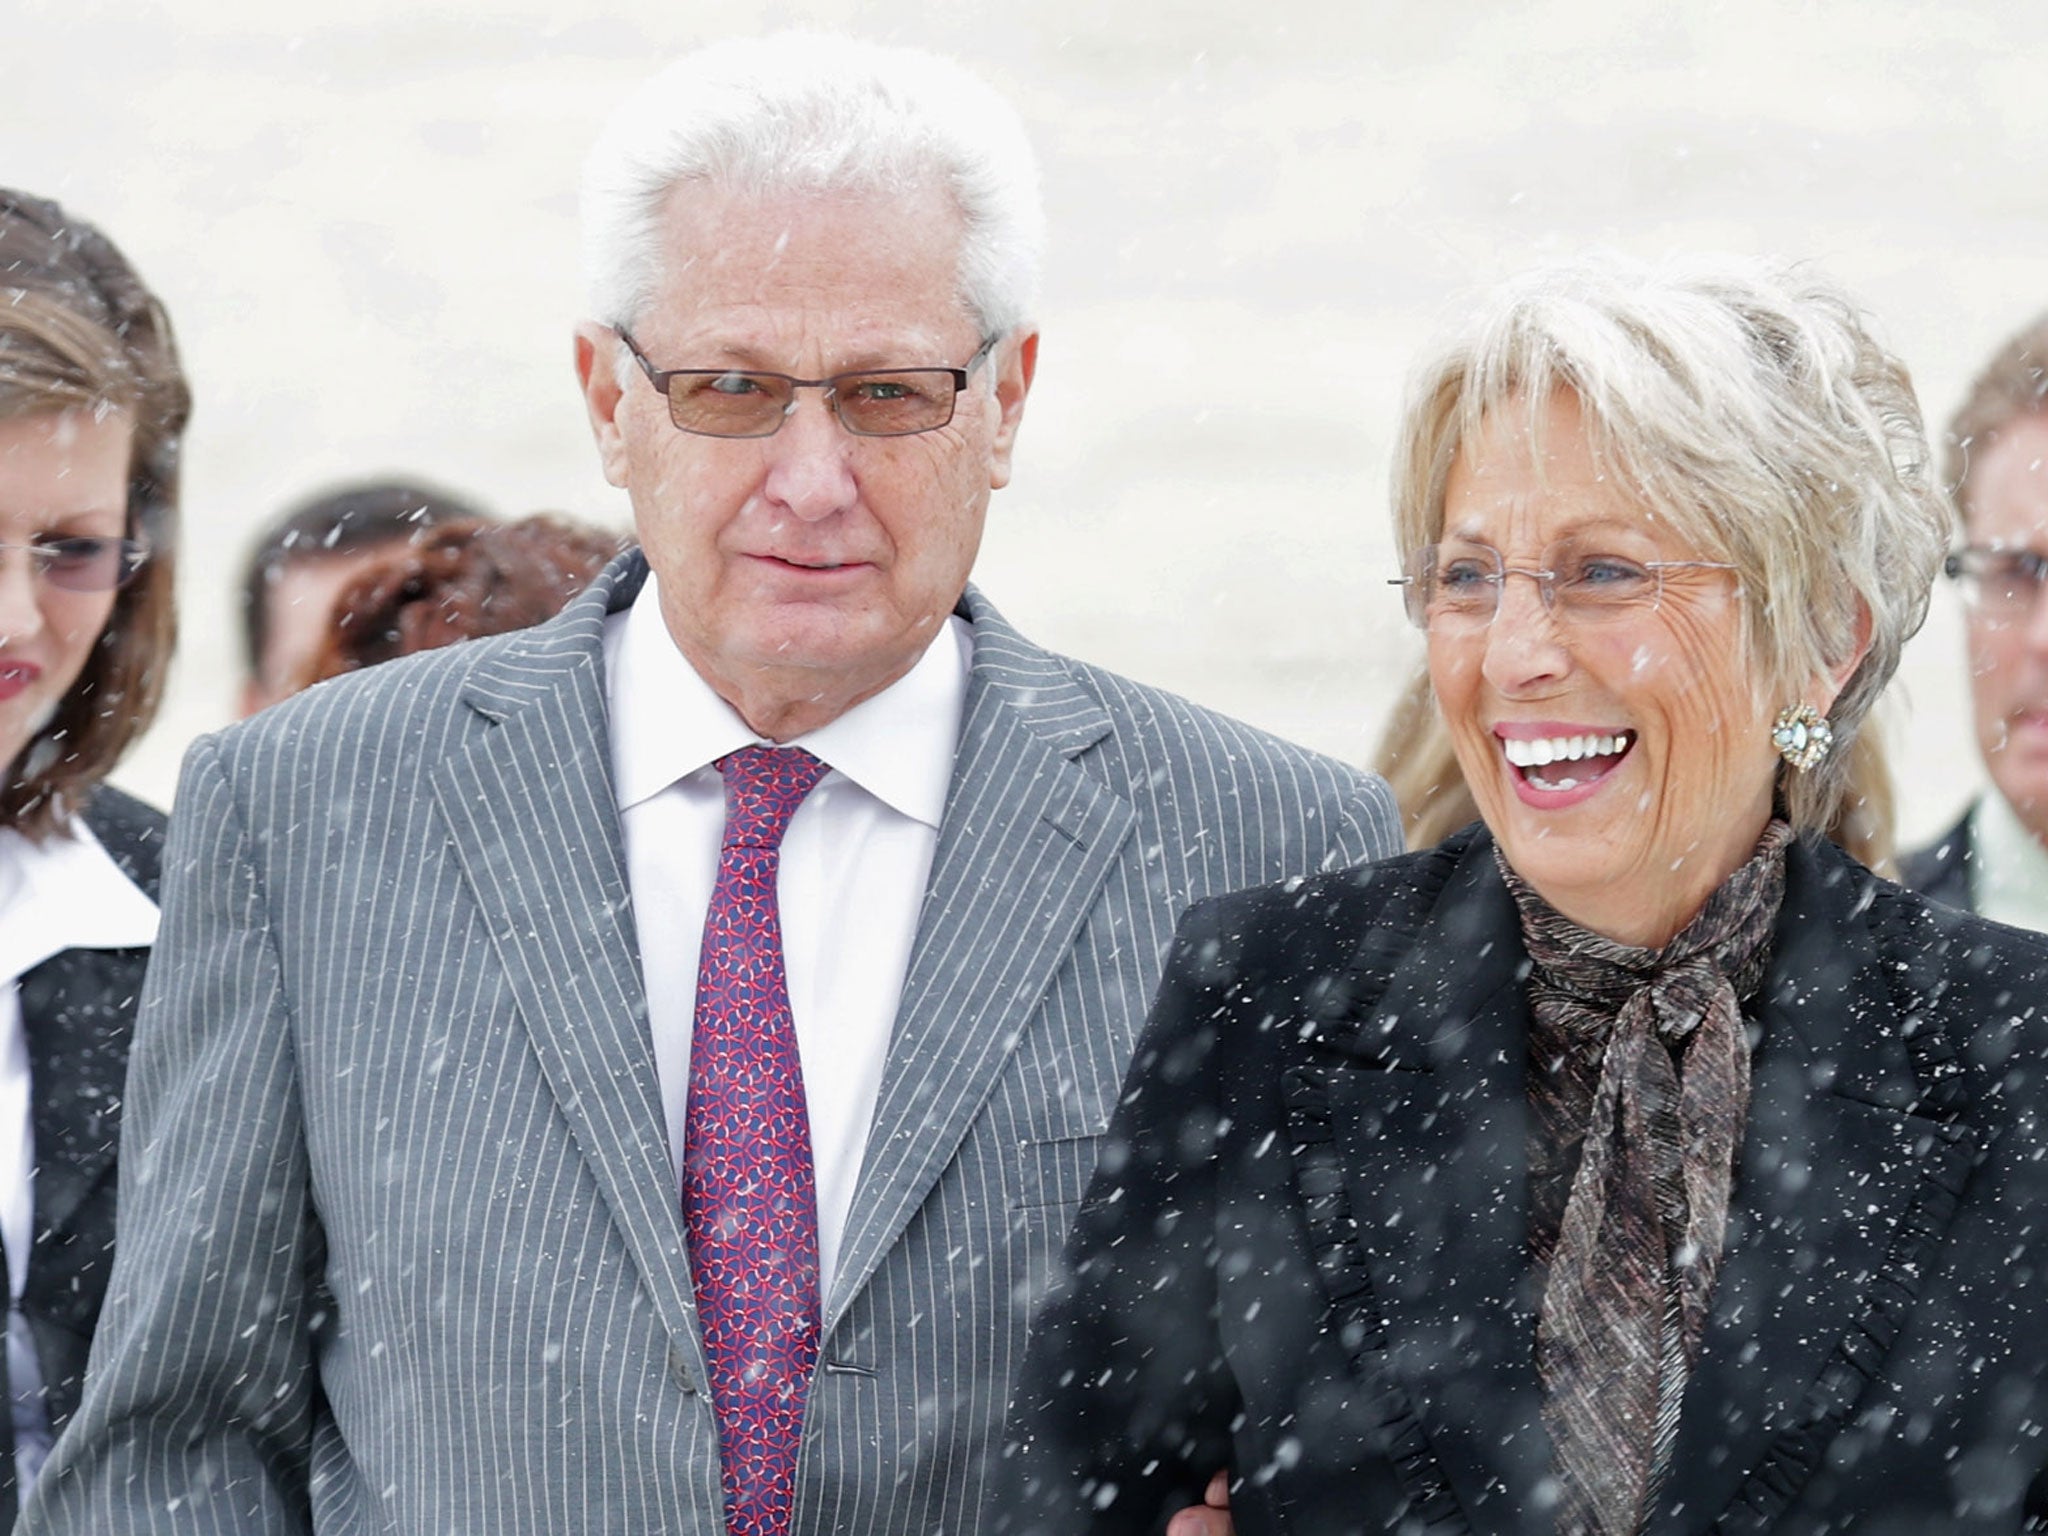 Hobby Lobby co-founders David Green and Barbara Green leave the US Supreme Court